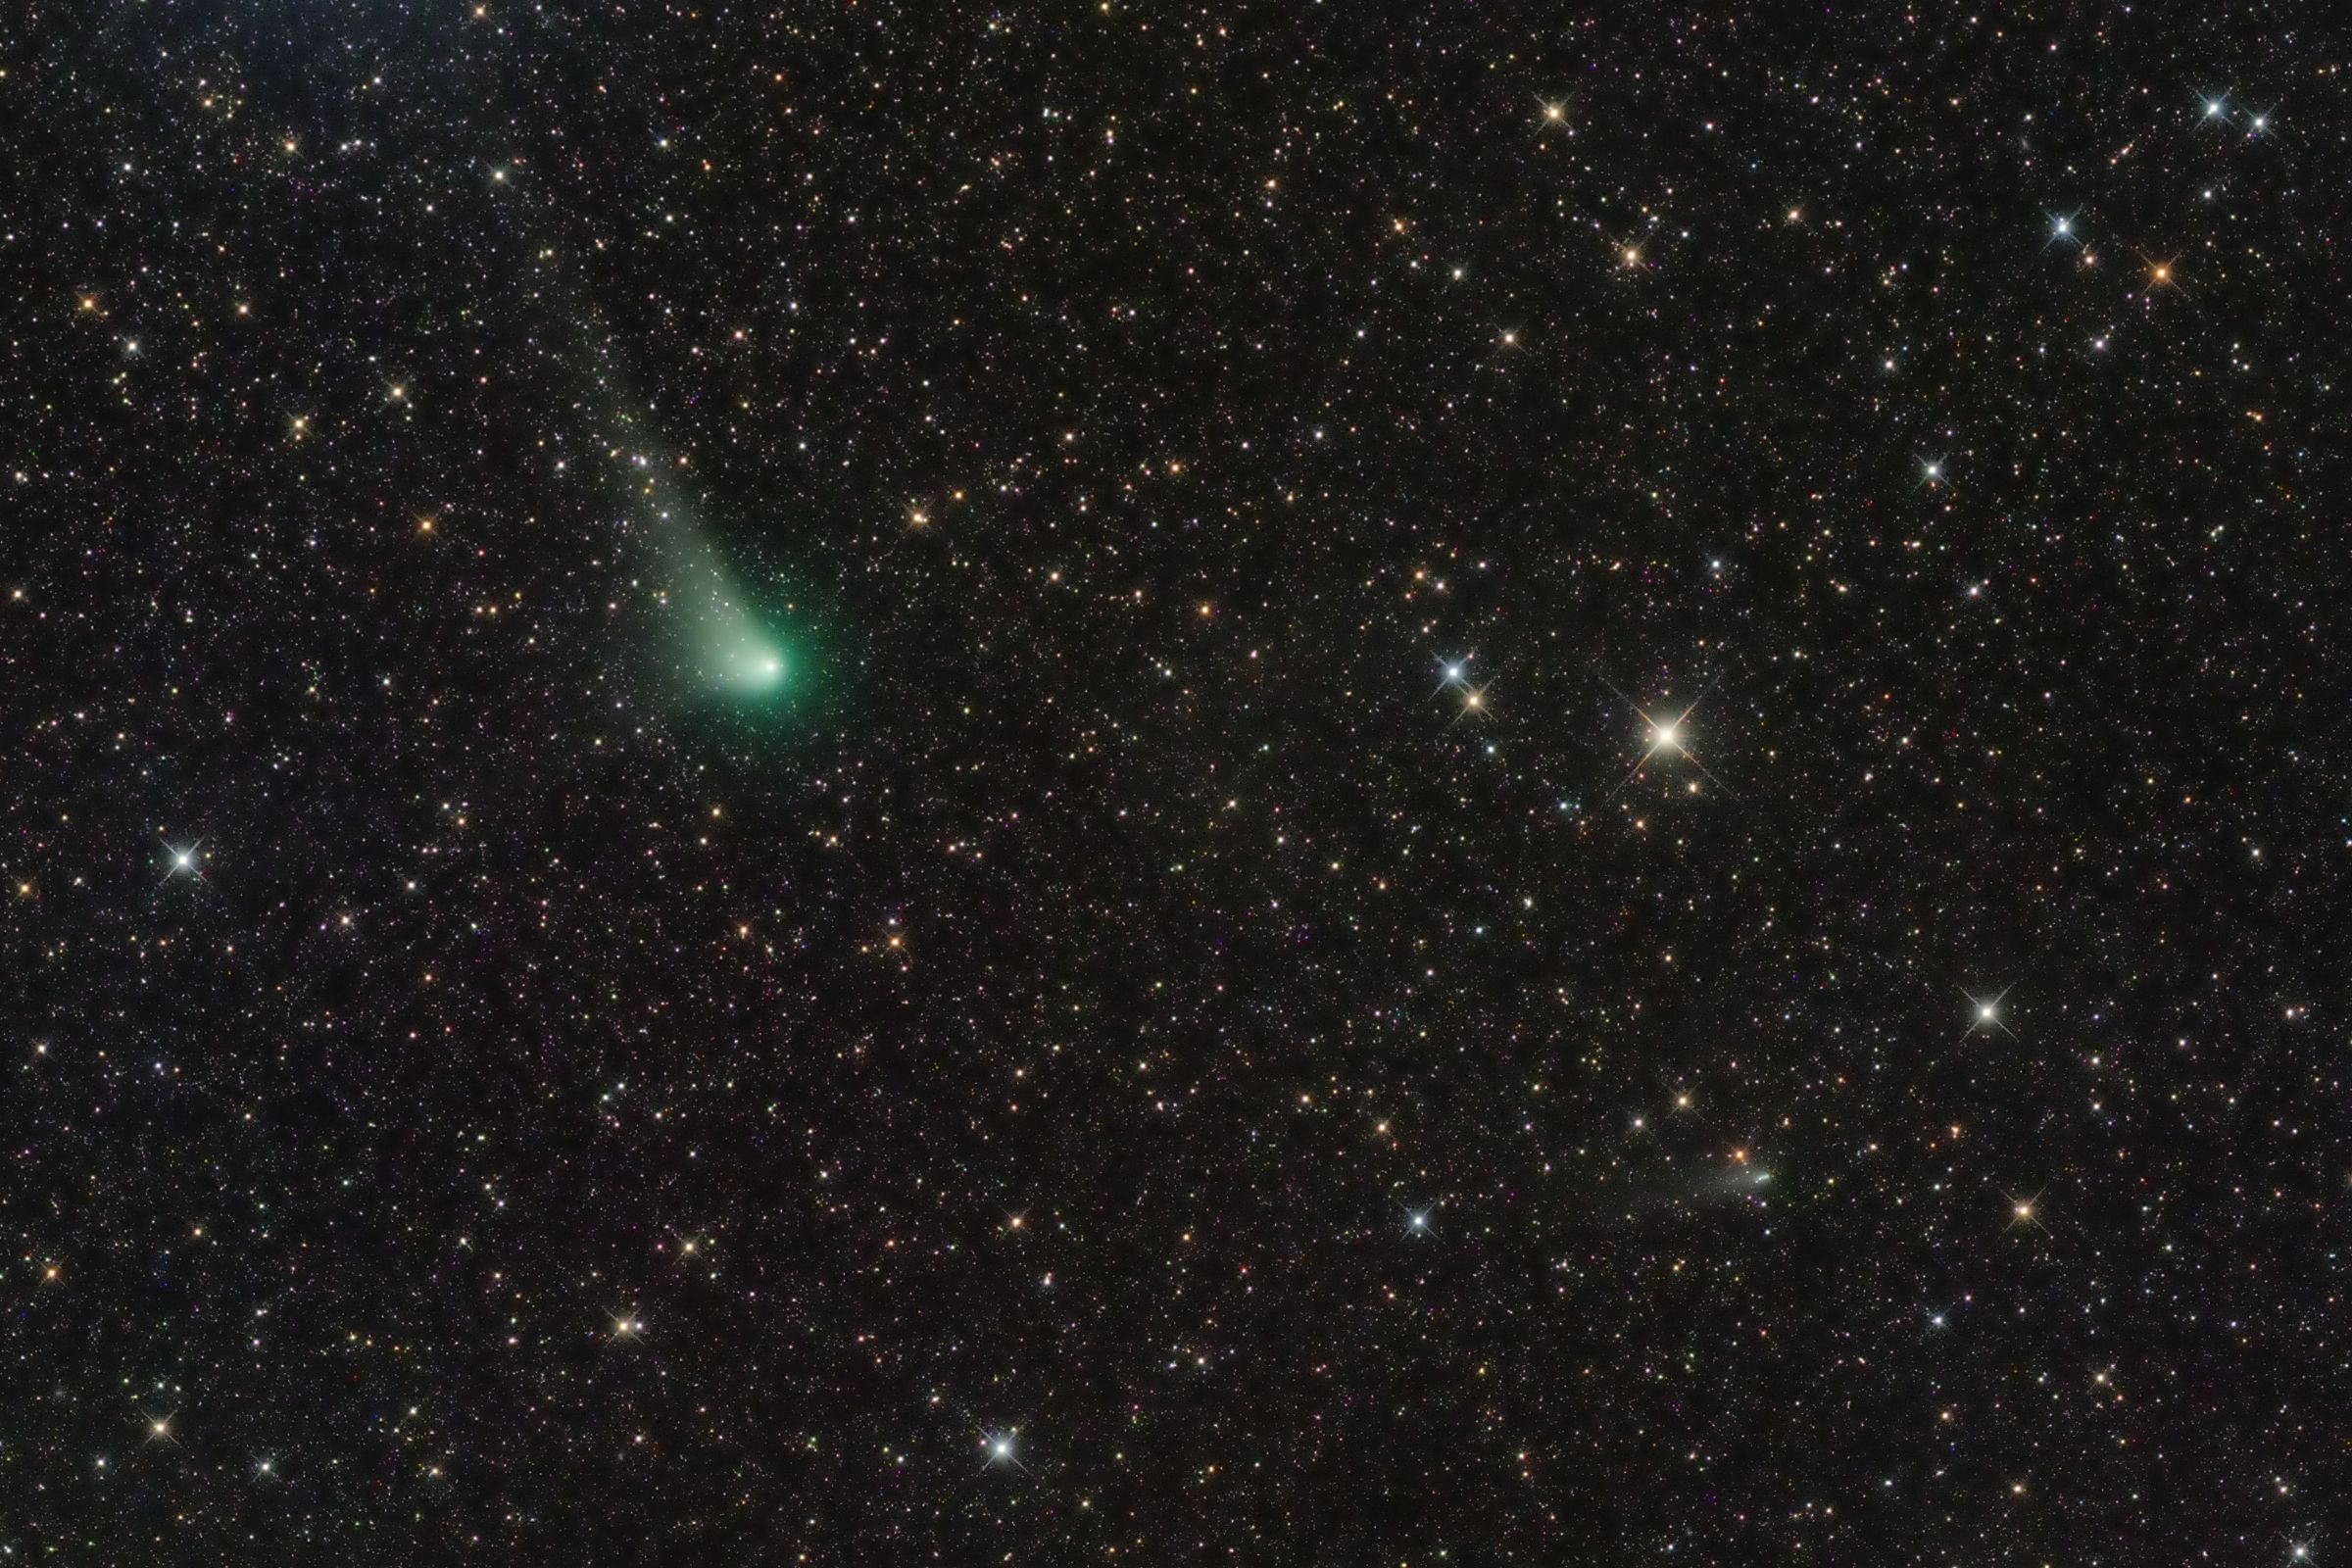  Two Comets in Southern Skies 